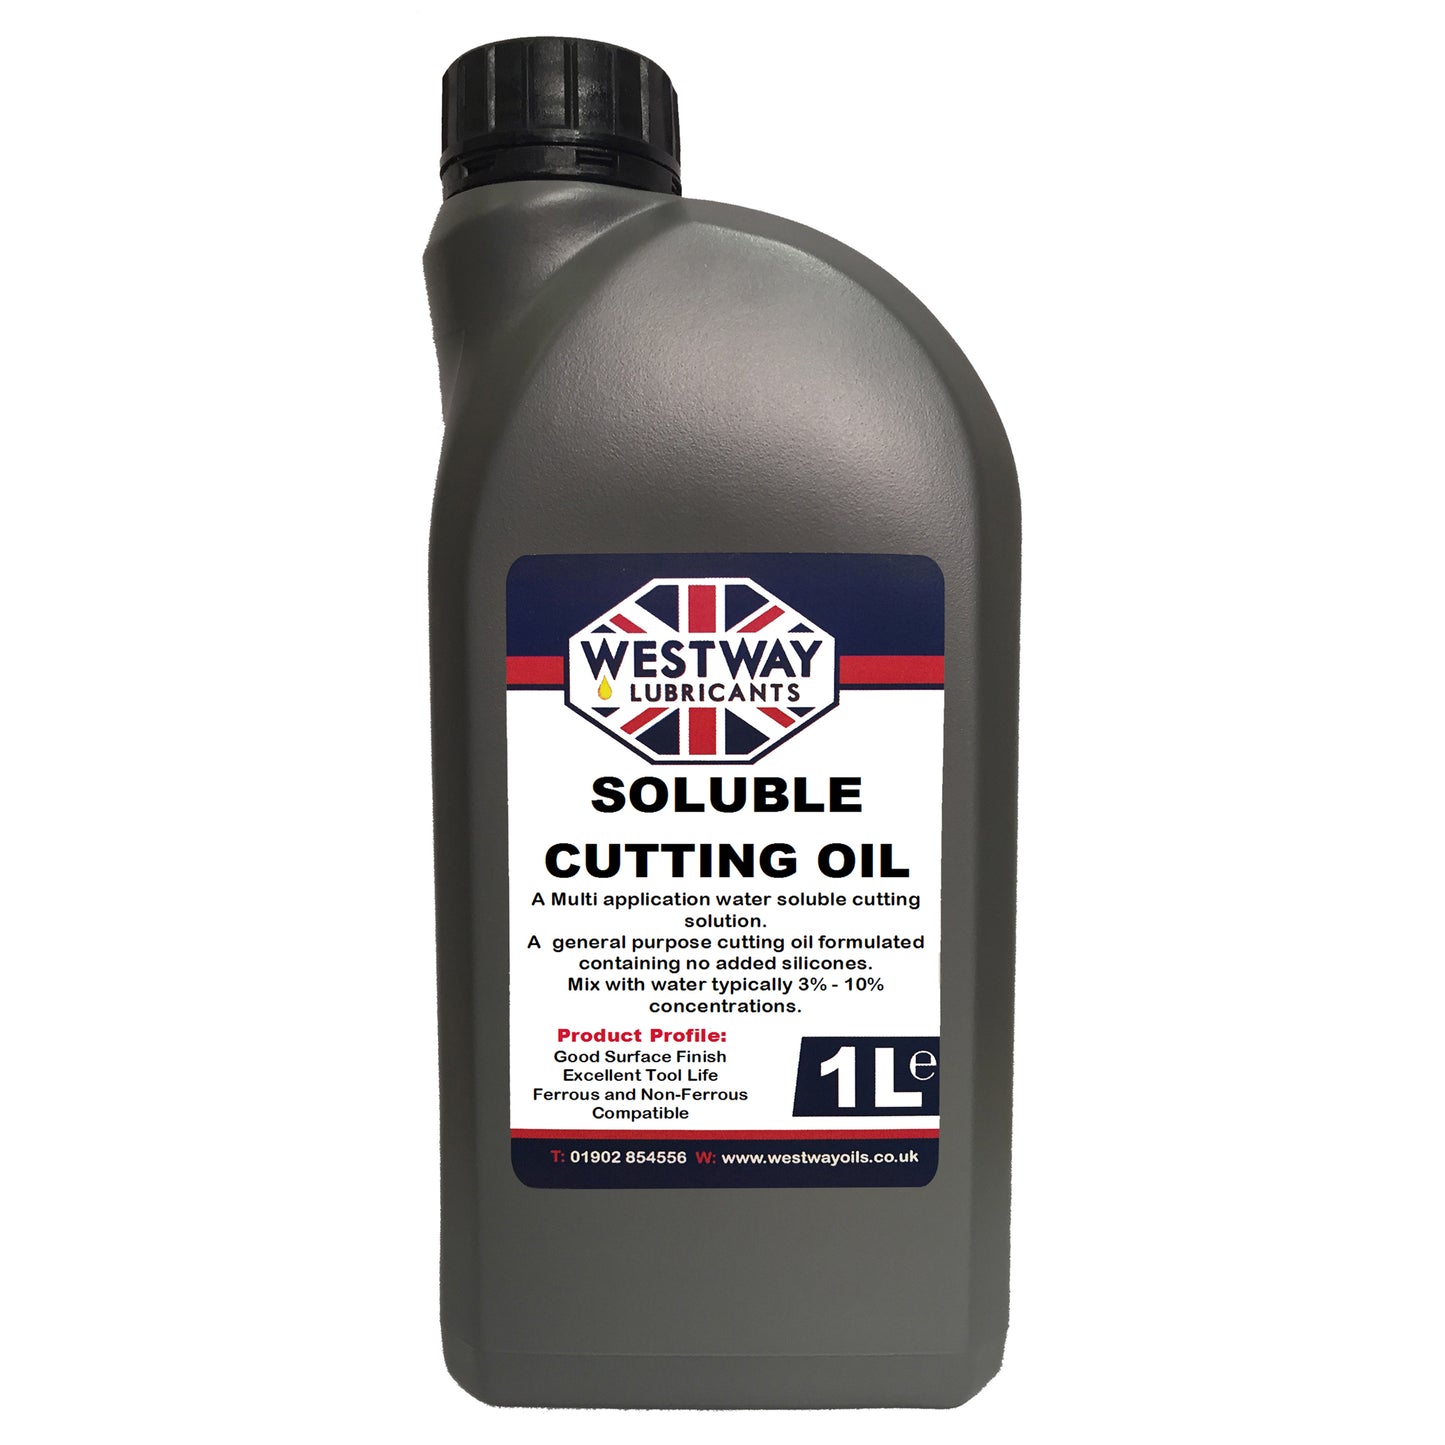 General Purpose Soluble Cutting Oil